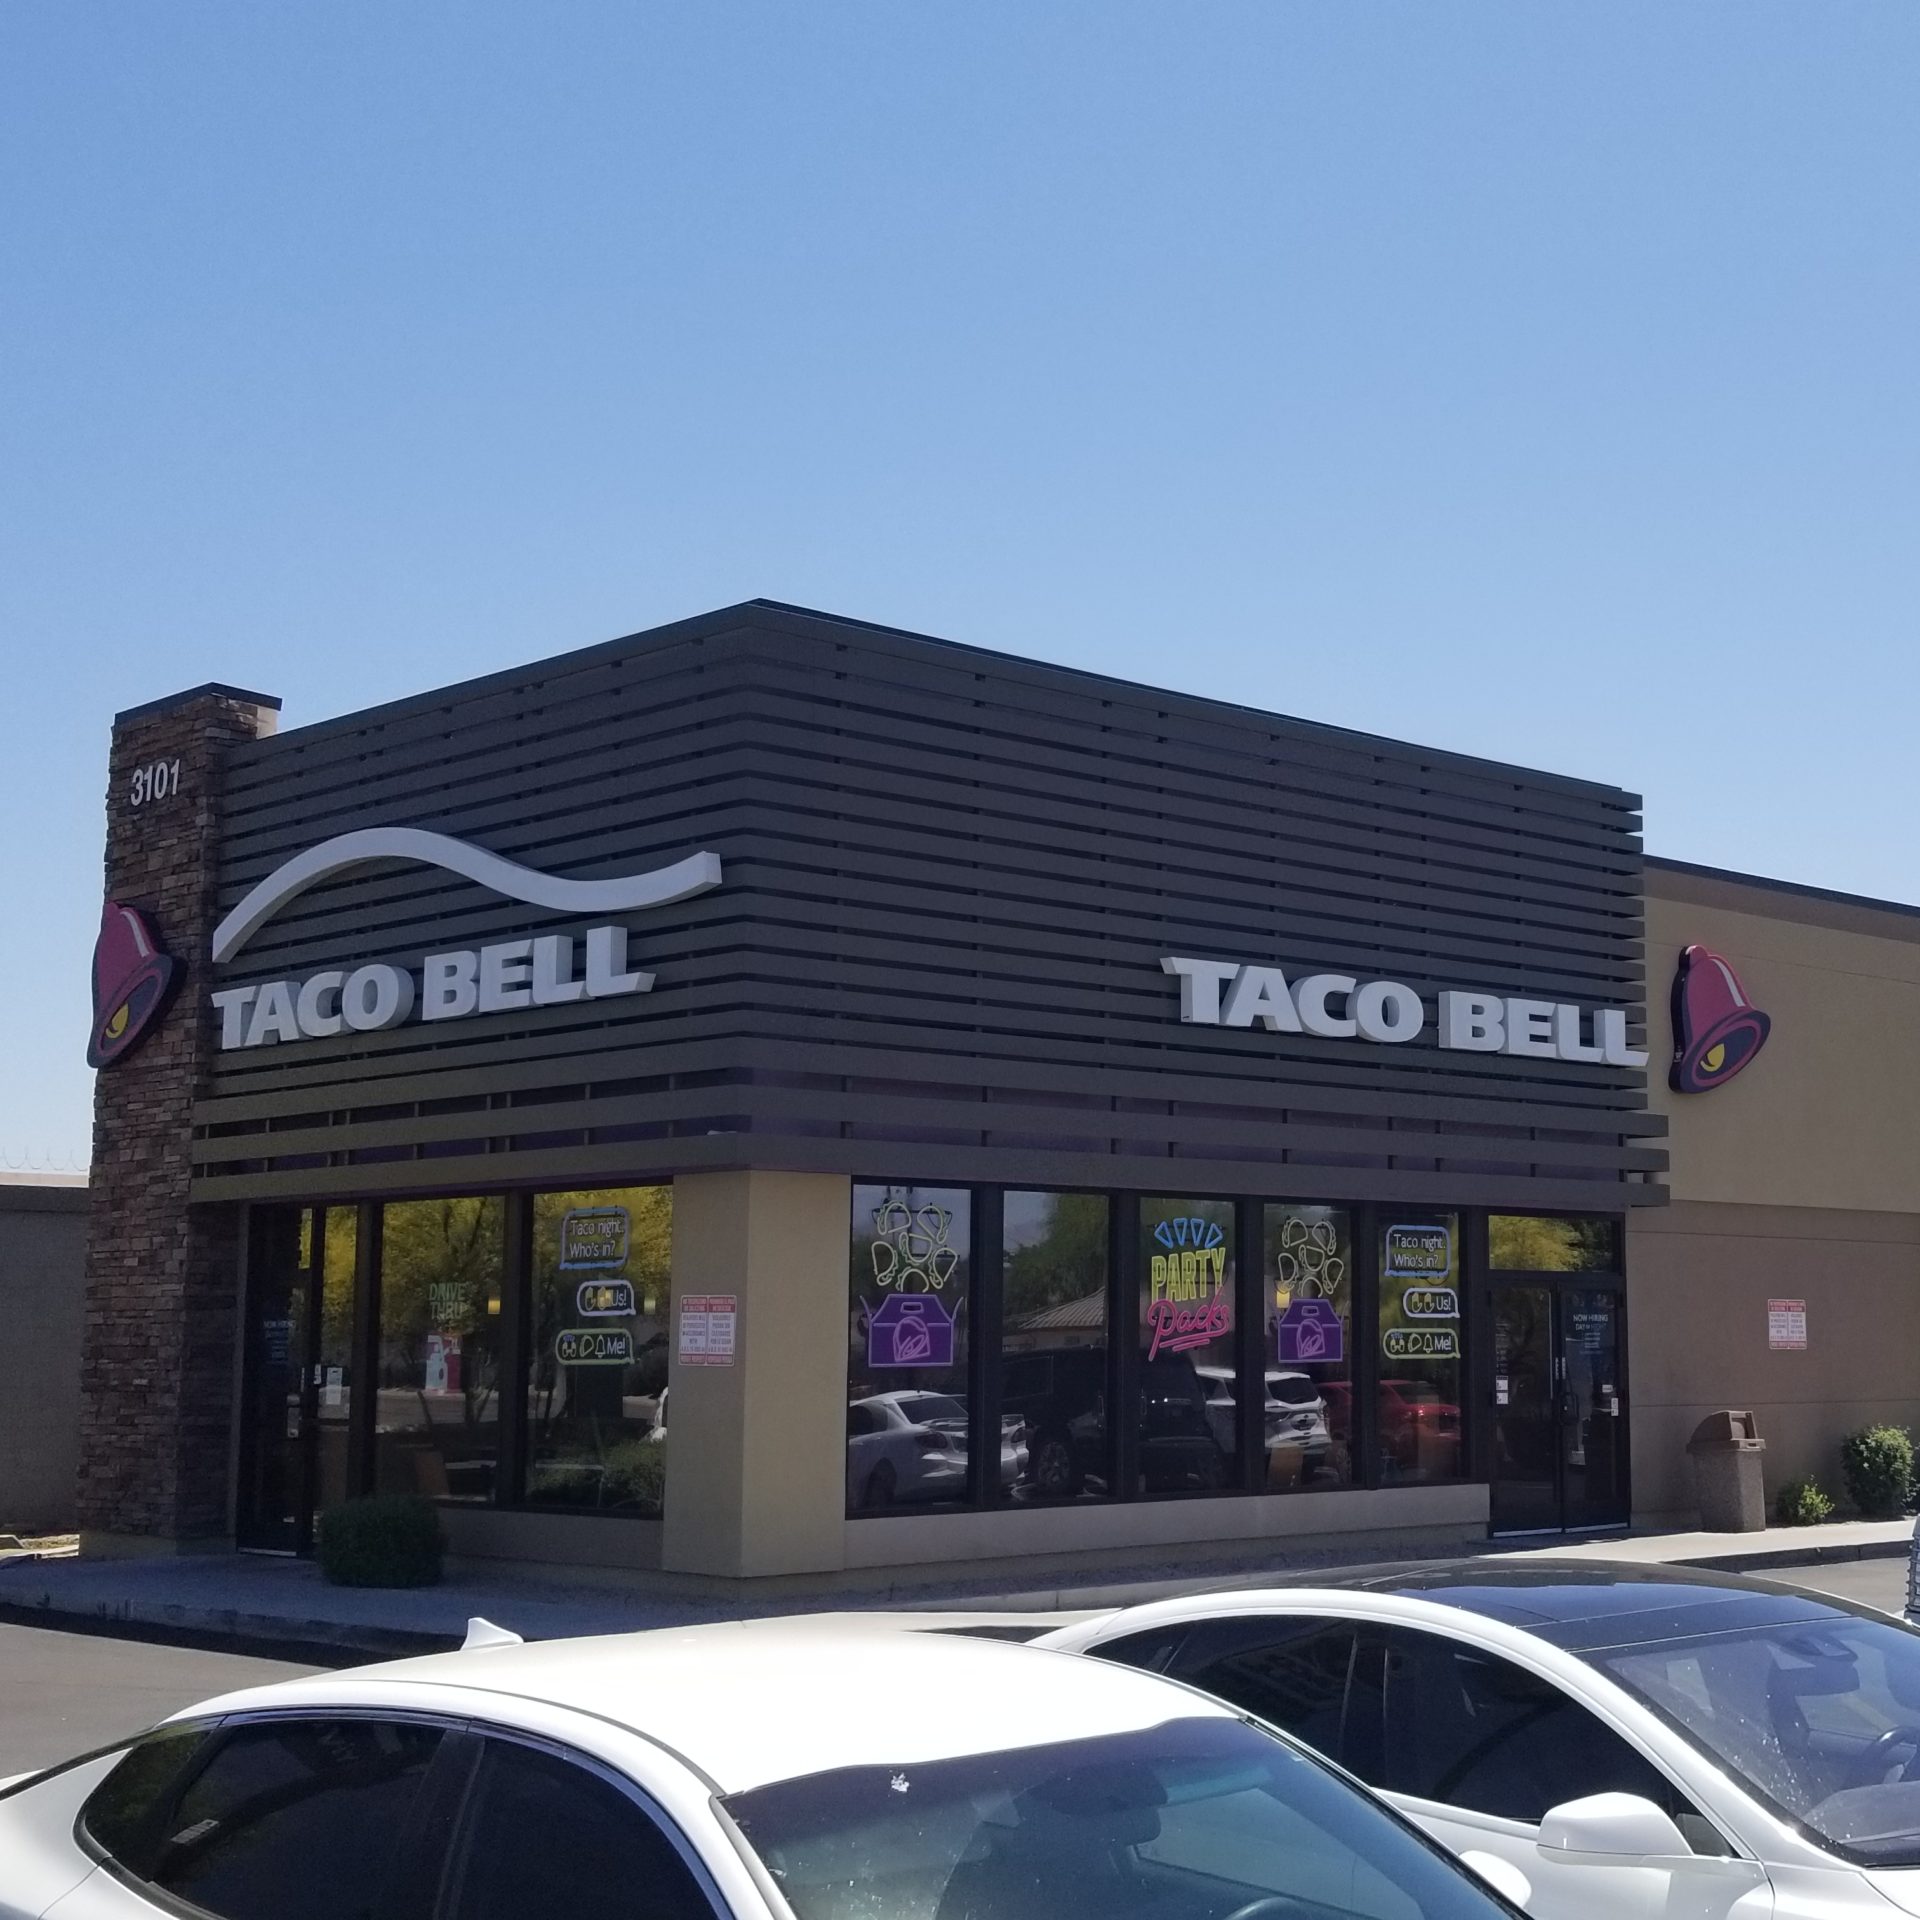 A taco bell with cars parked in front of it.